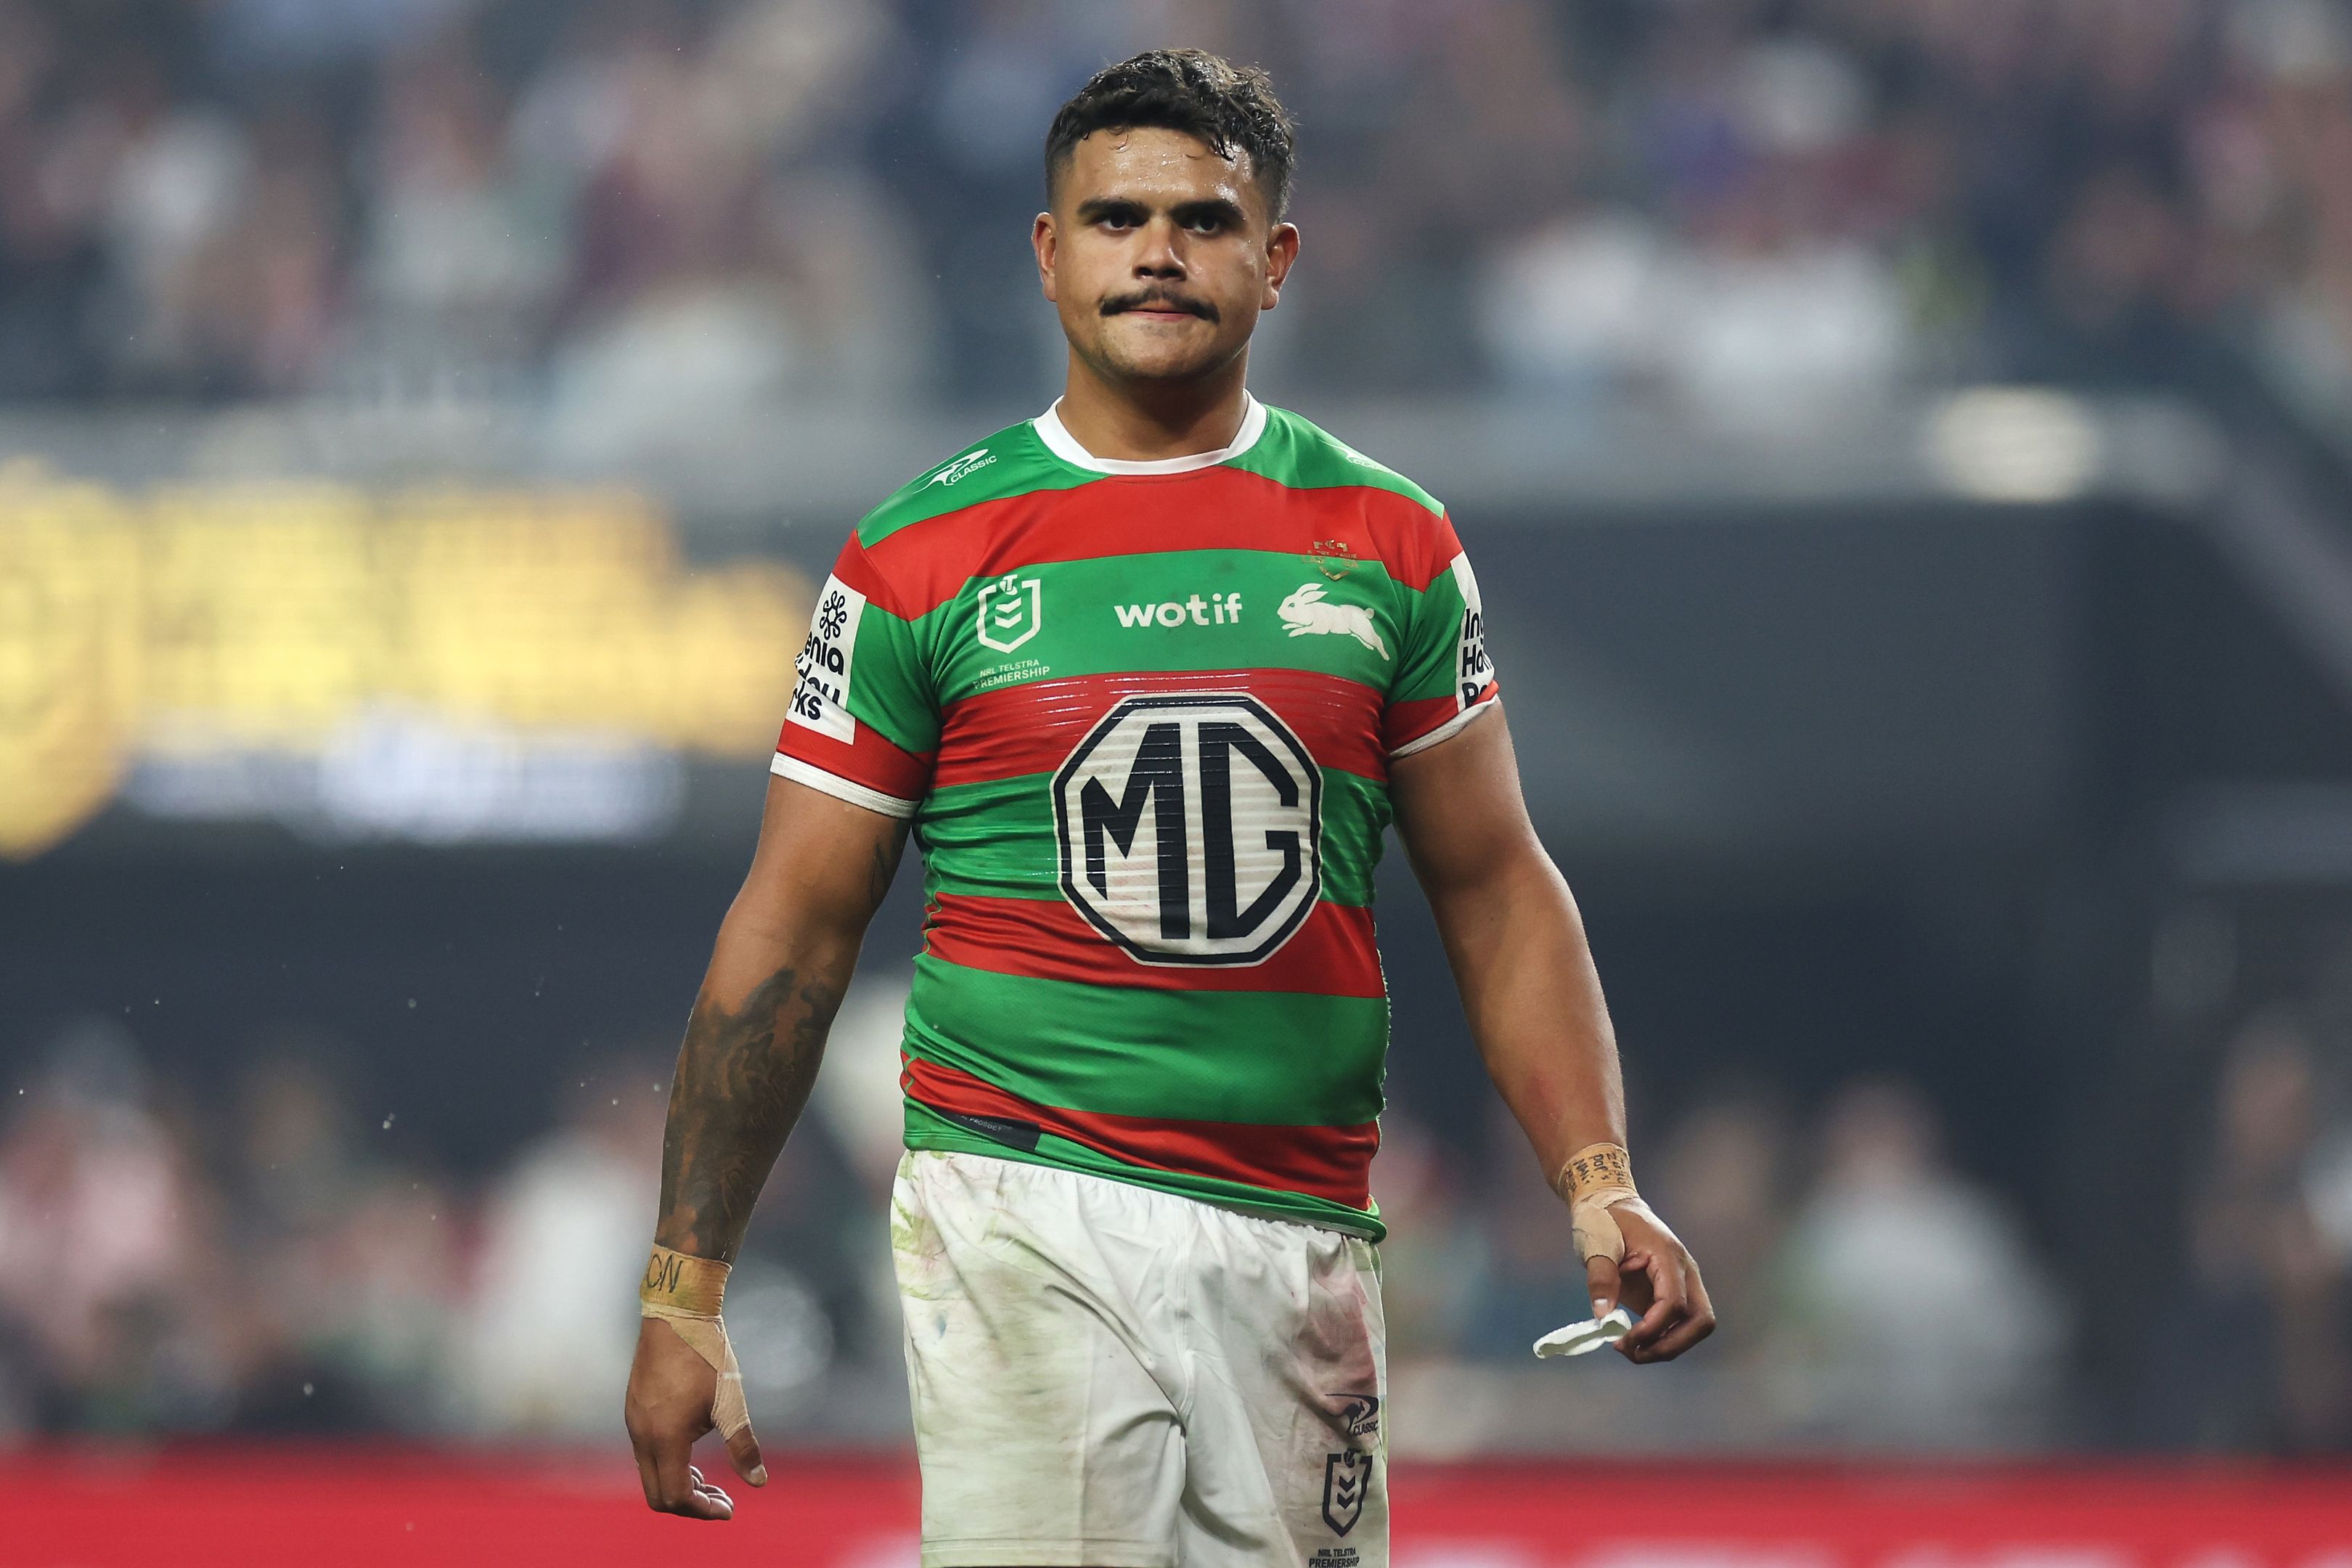 EXCLUSIVE: Why Latrell Mitchell needs to take one for the team after Jye Gray debut, writes Paul Gallen